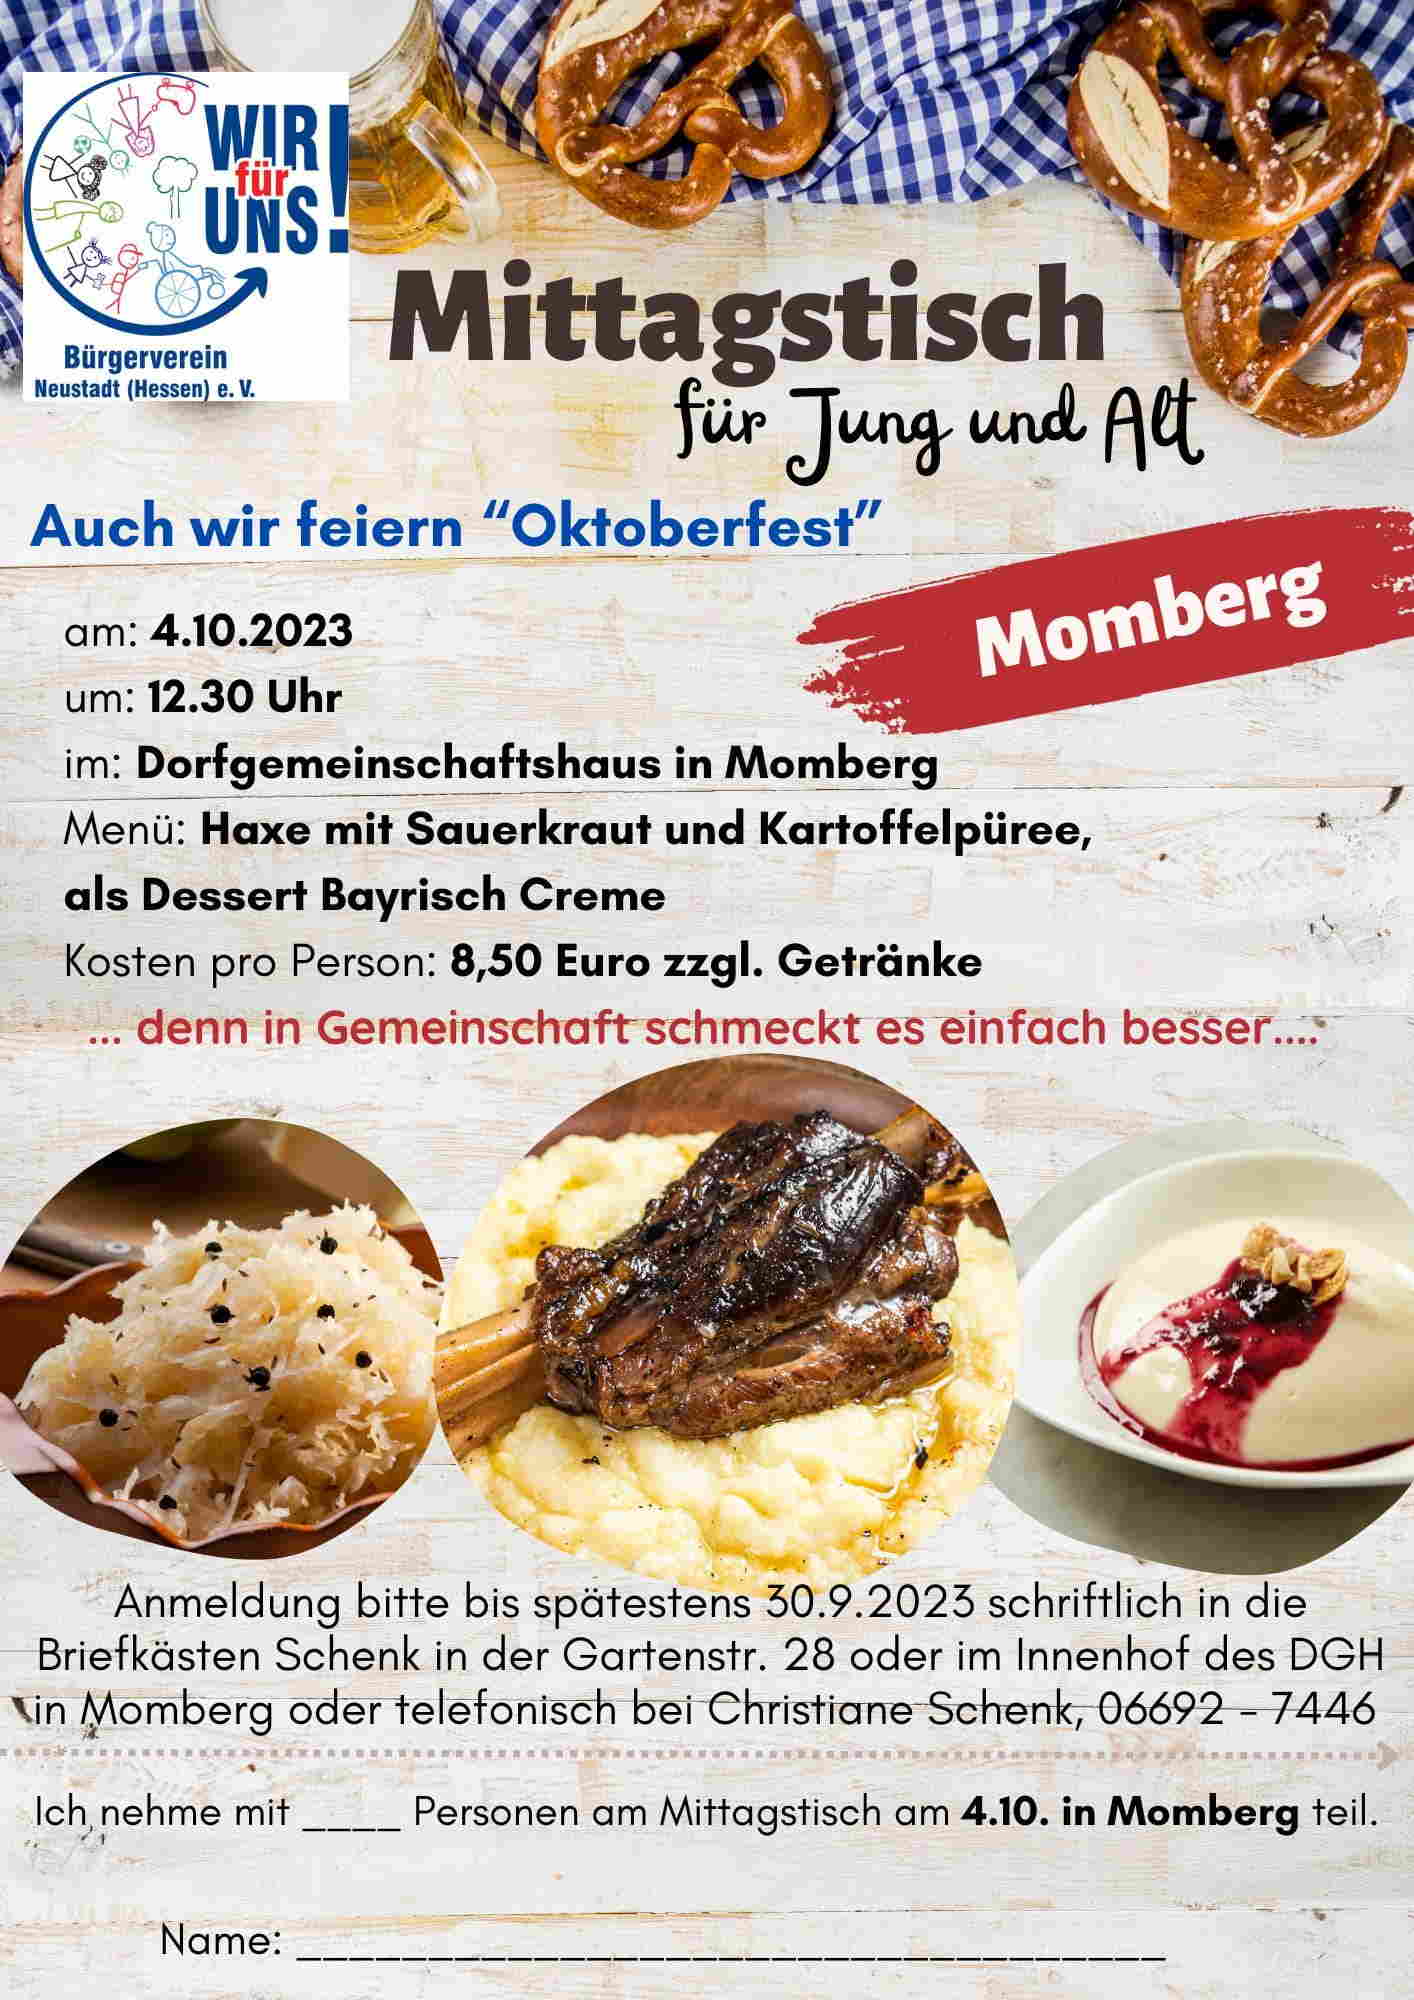 You are currently viewing Mittagstisch in Momberg am 4.10. 2023